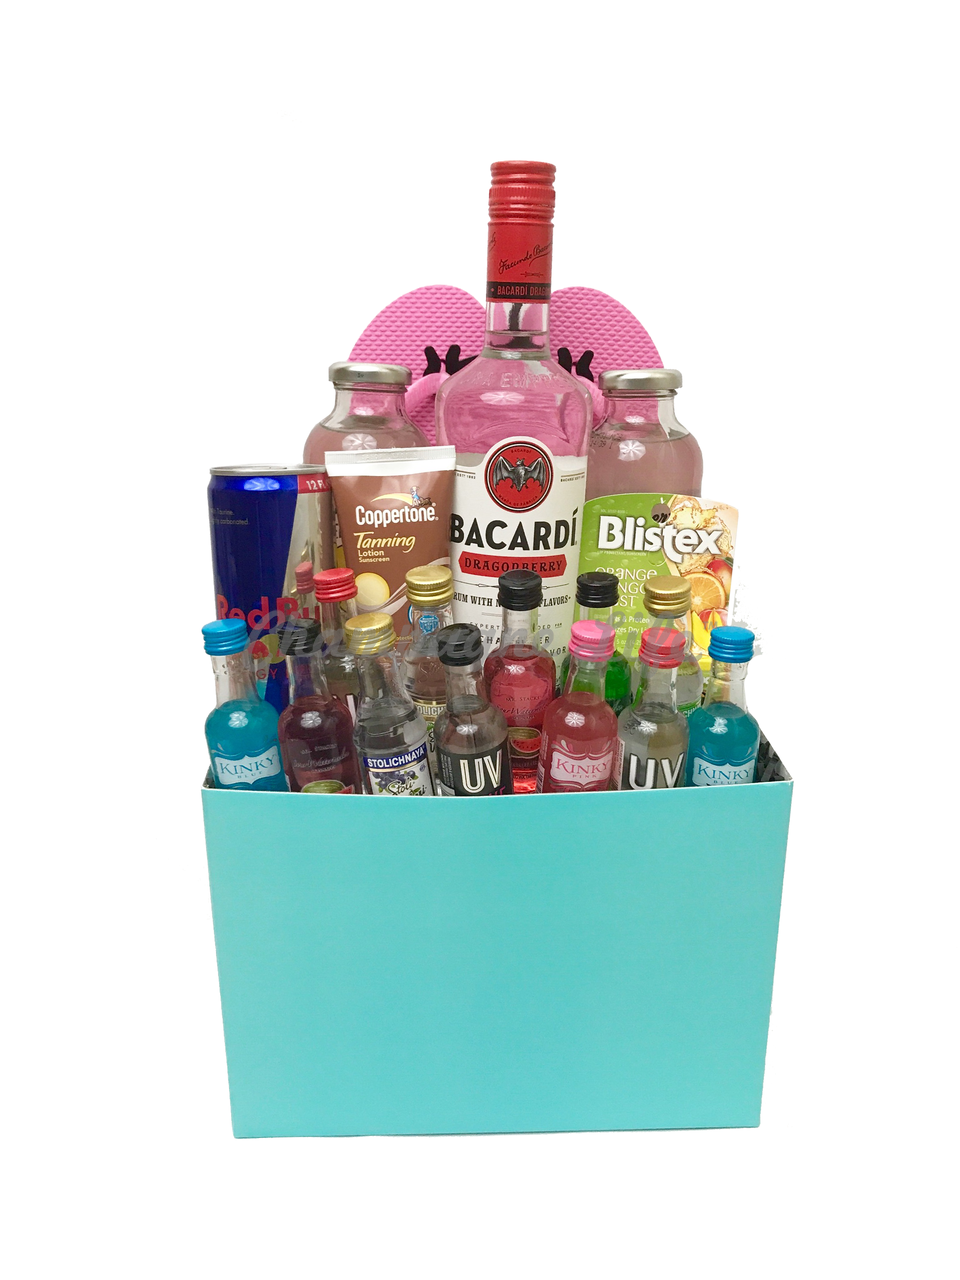 Pool Party Gift Box - Champagne Life Gift Baskets